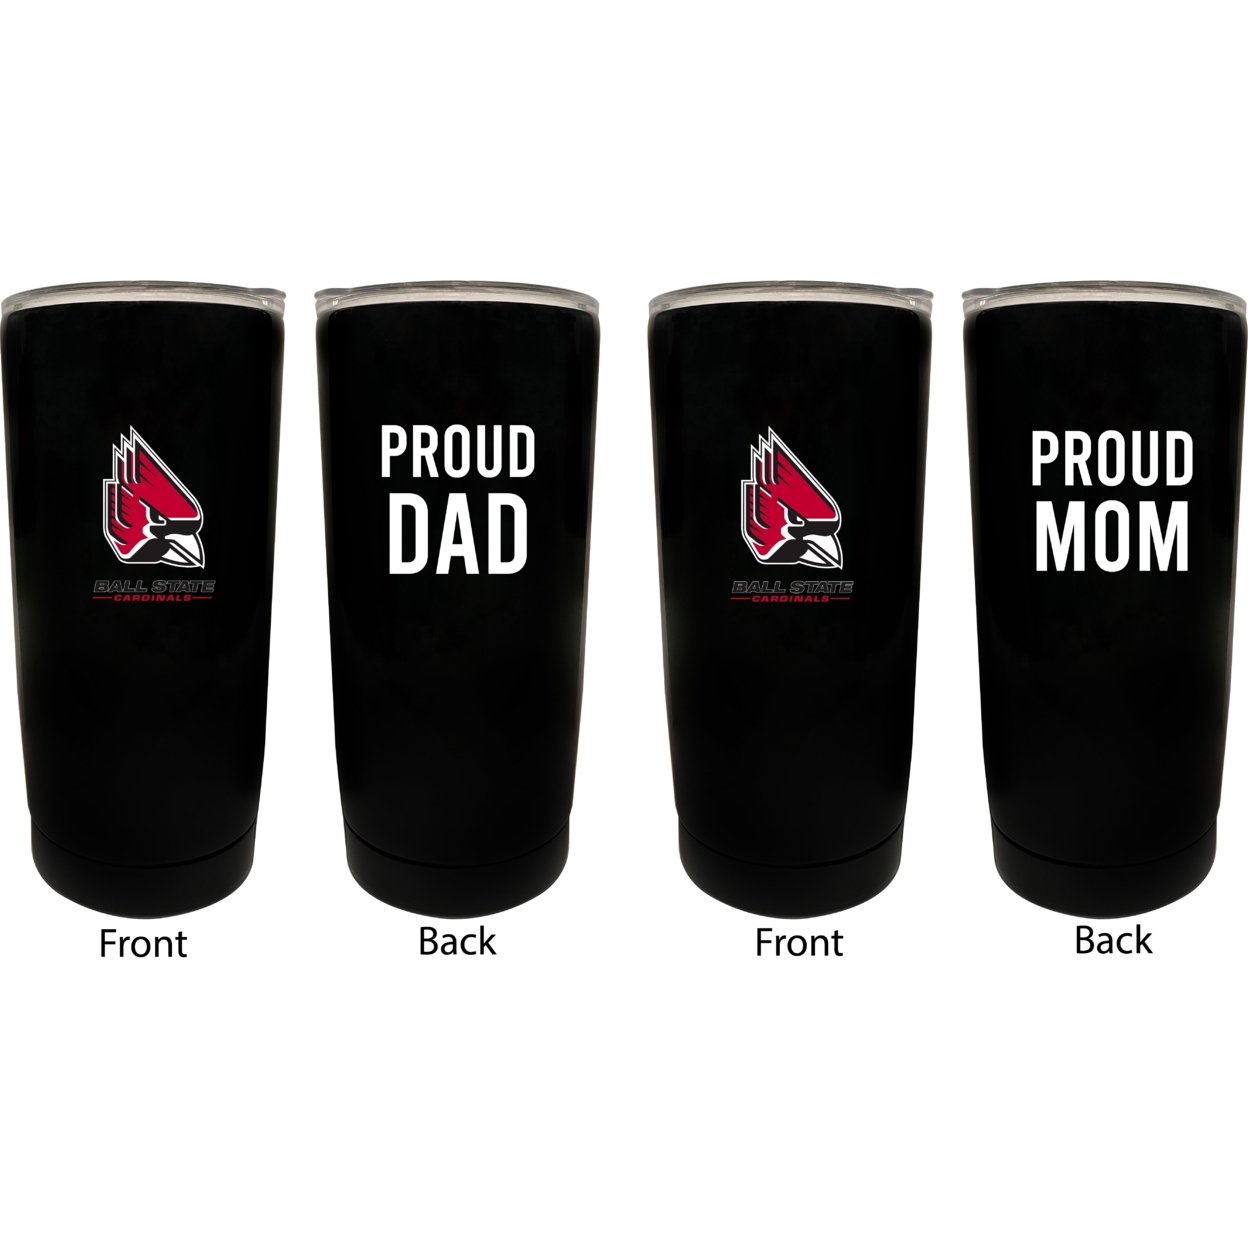 Ball State University Proud Mom And Dad 16 Oz Insulated Stainless Steel Tumblers 2 Pack Black.